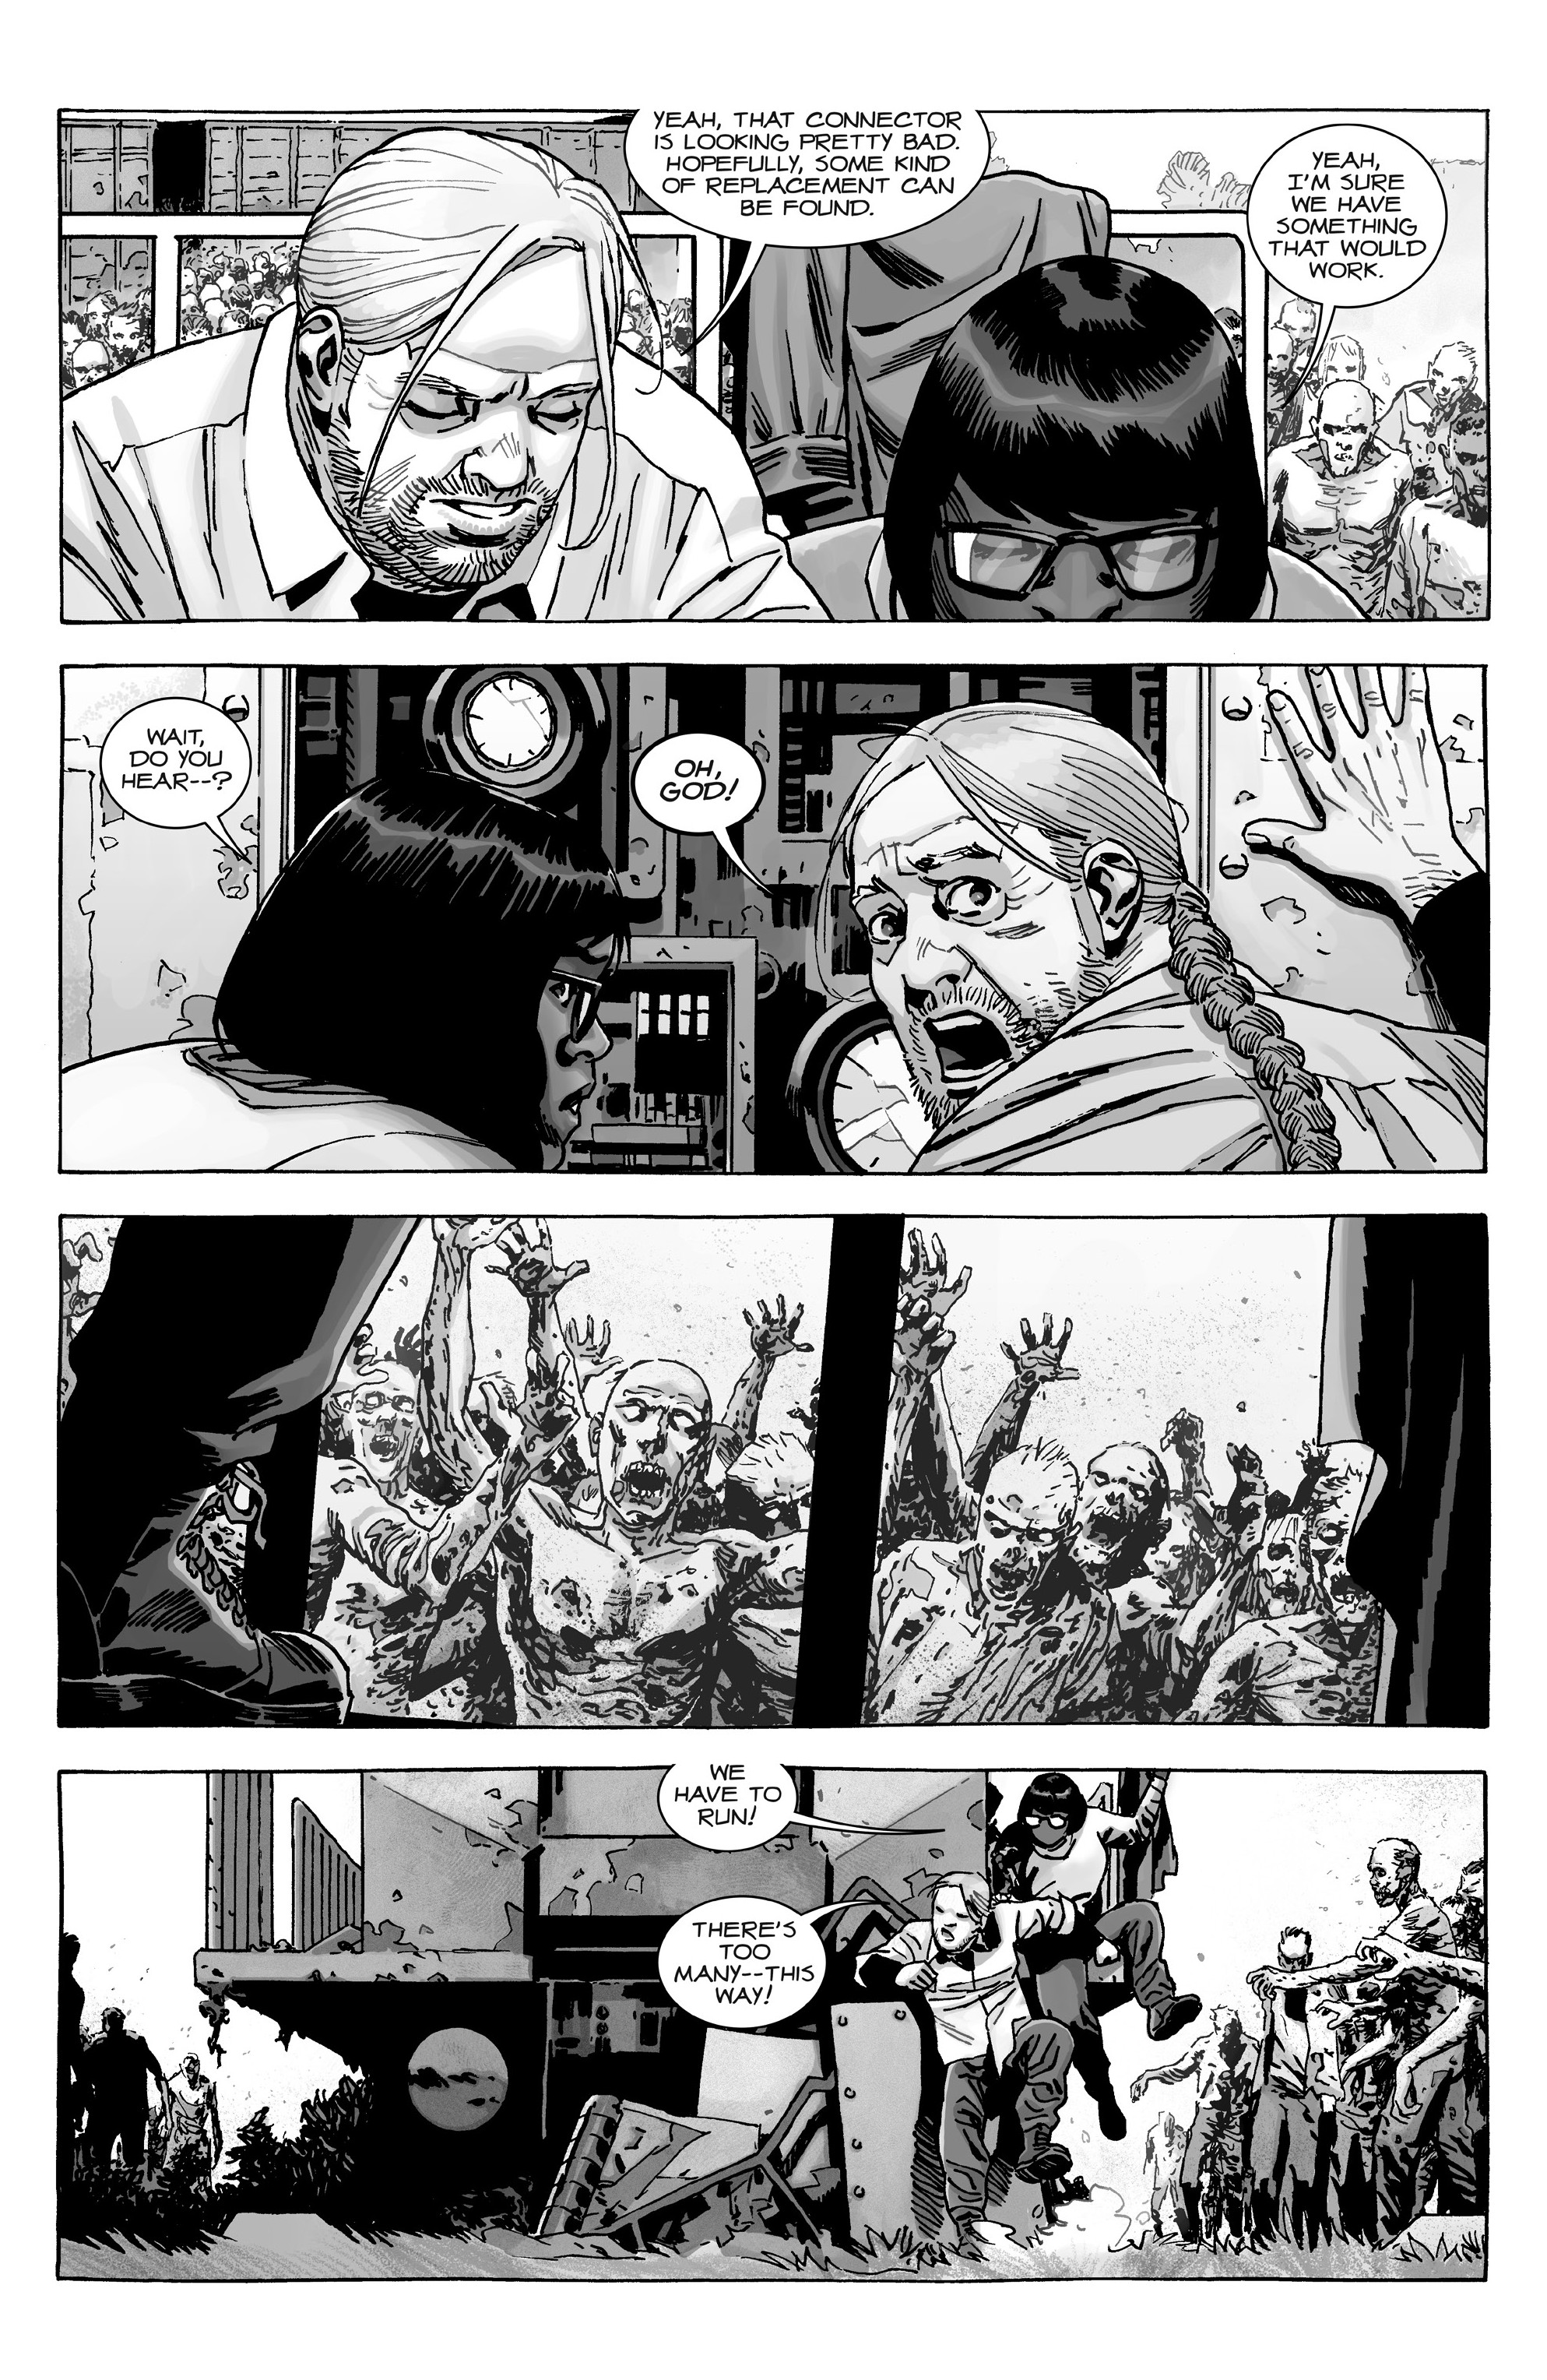 The Walking Dead (2003-): Chapter 189 - Page 3